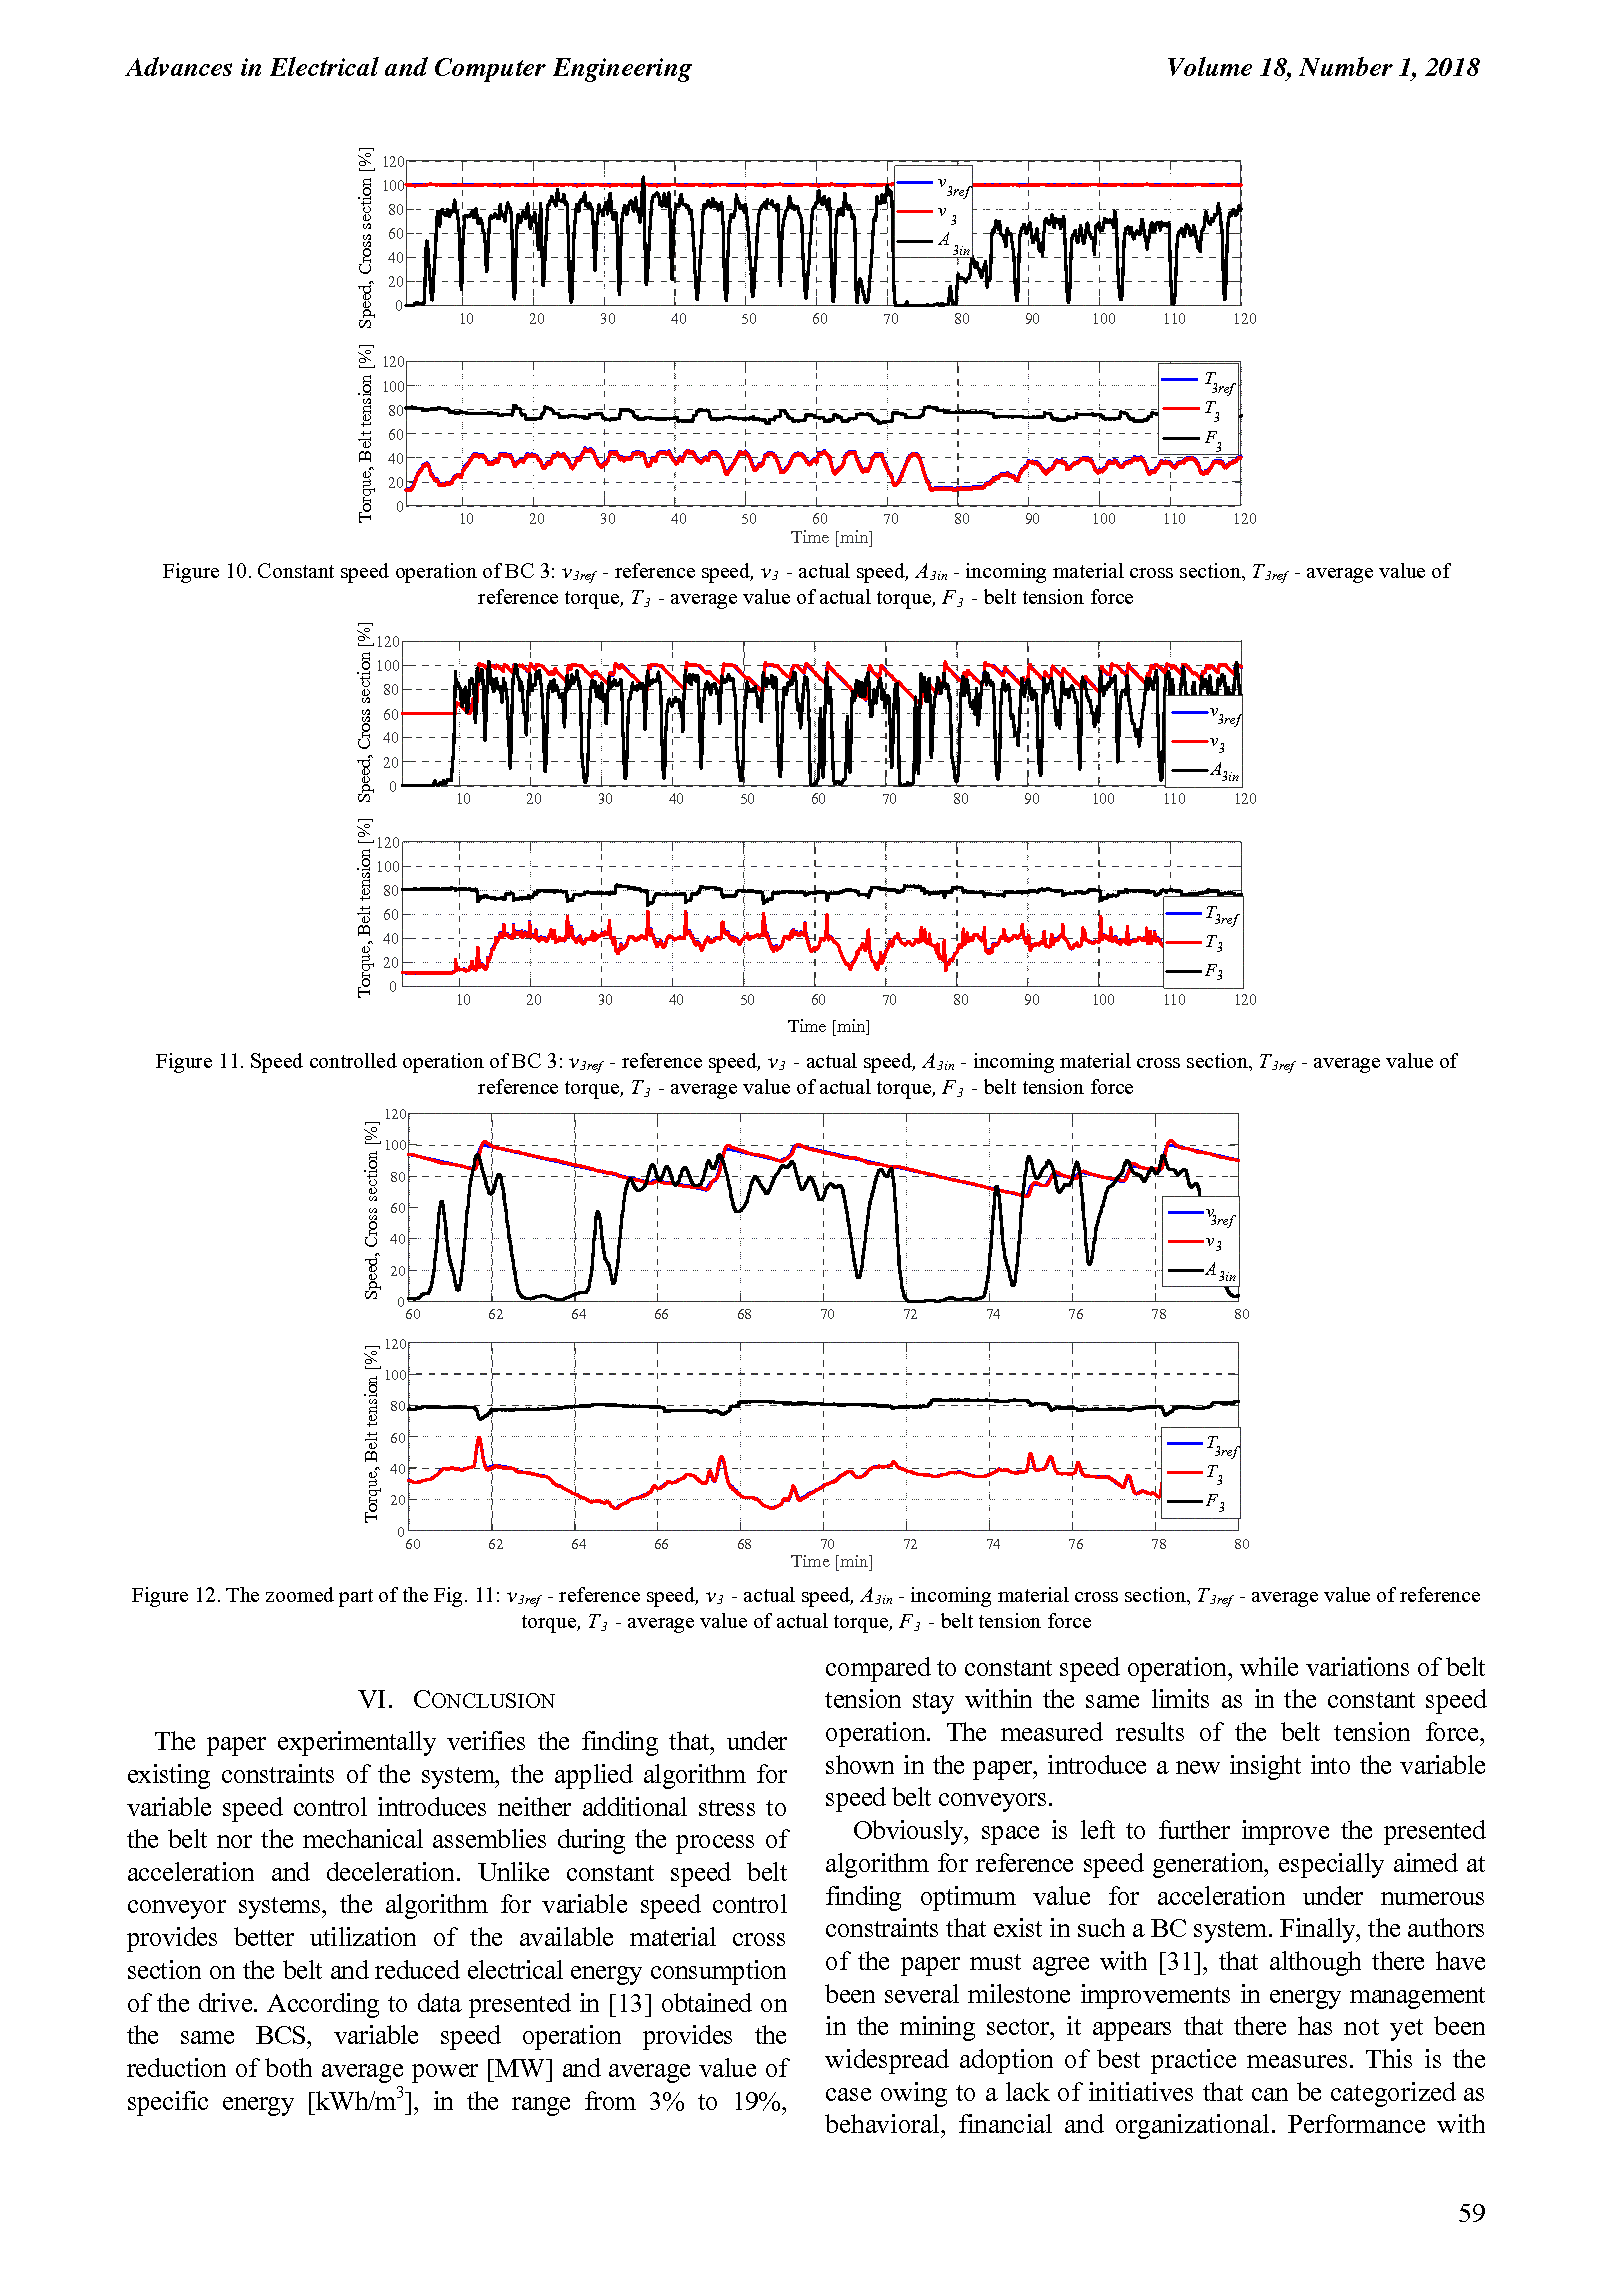 PDF Quickview for paper with DOI:10.4316/AECE.2018.01007